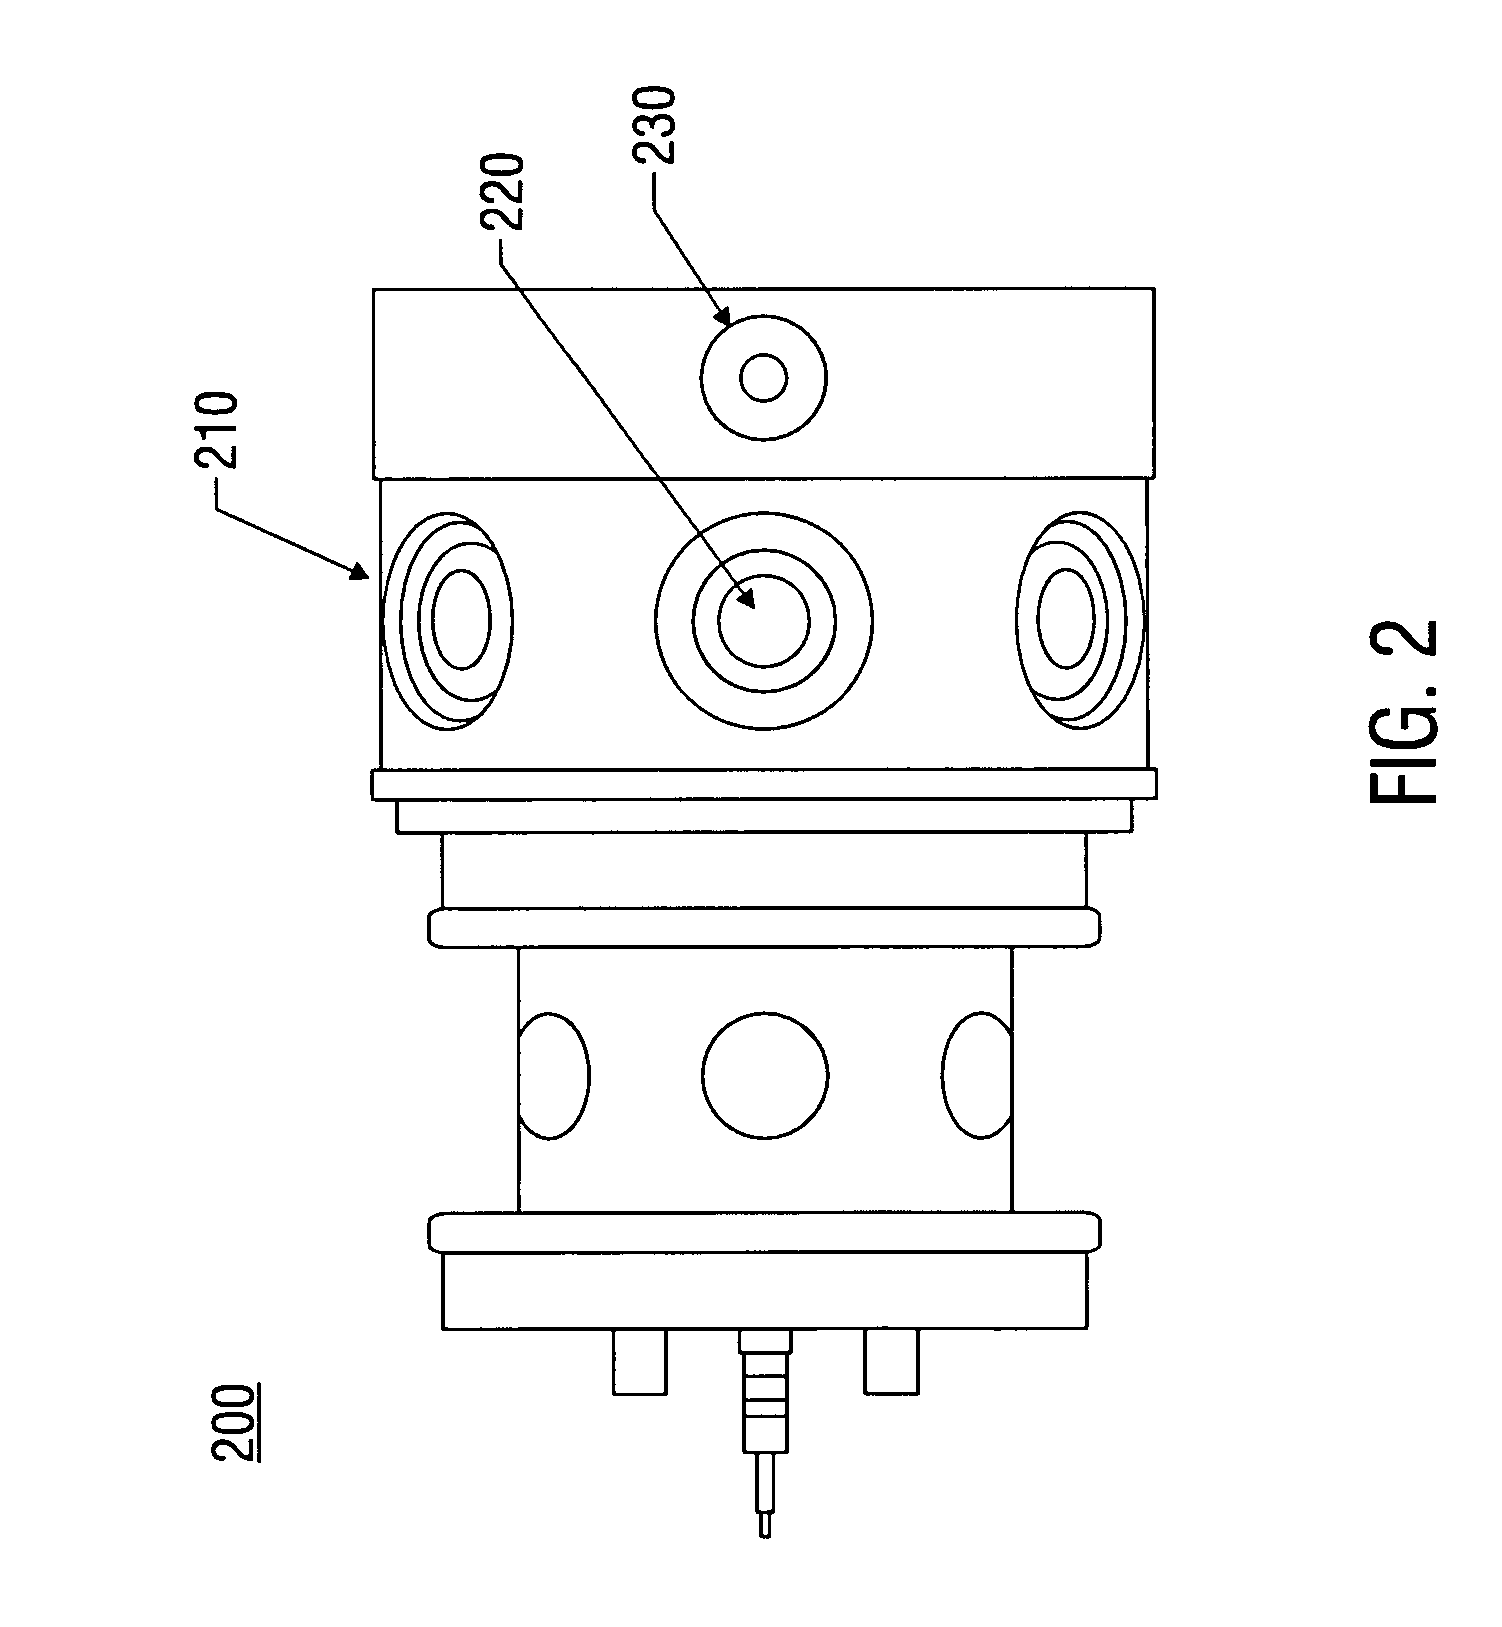 Apparatus and method for detecting fluid entering a wellbore